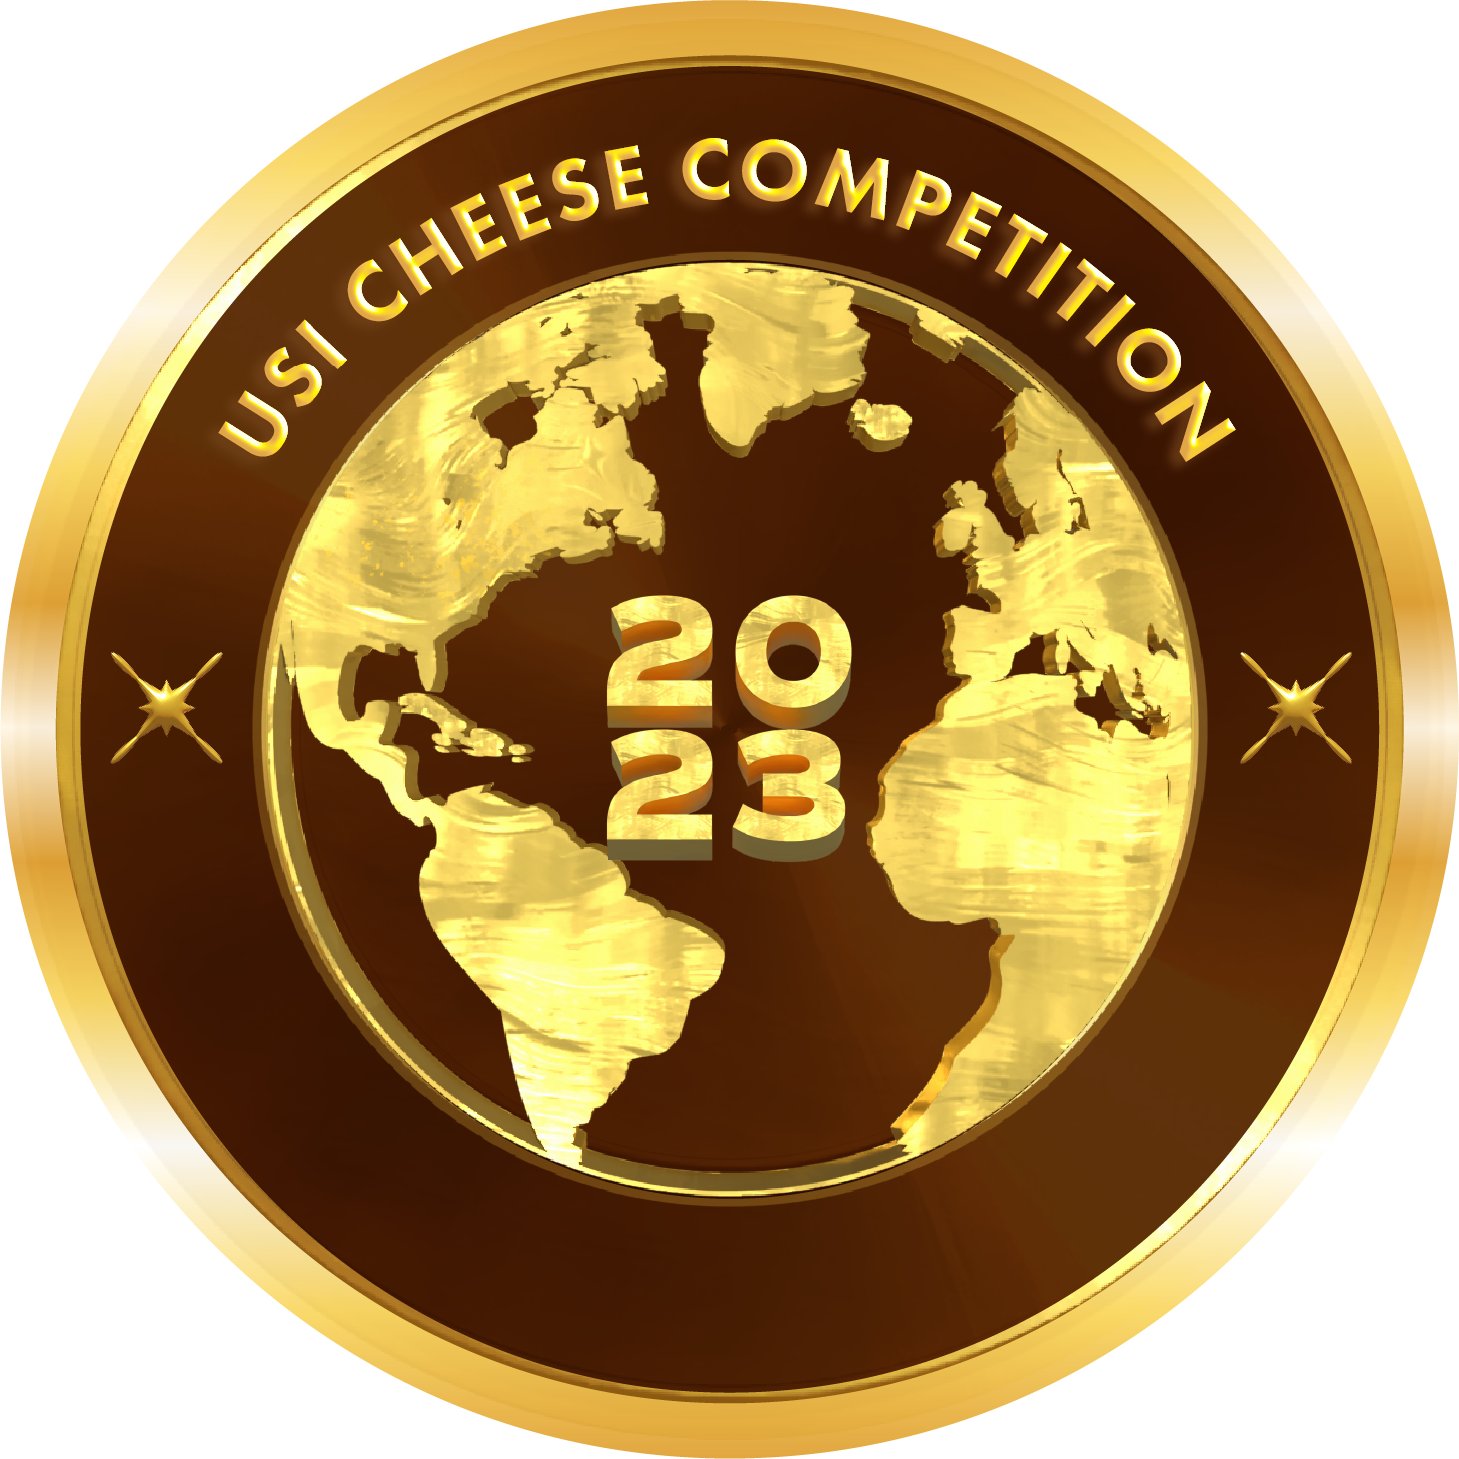 US International Cheese Competition